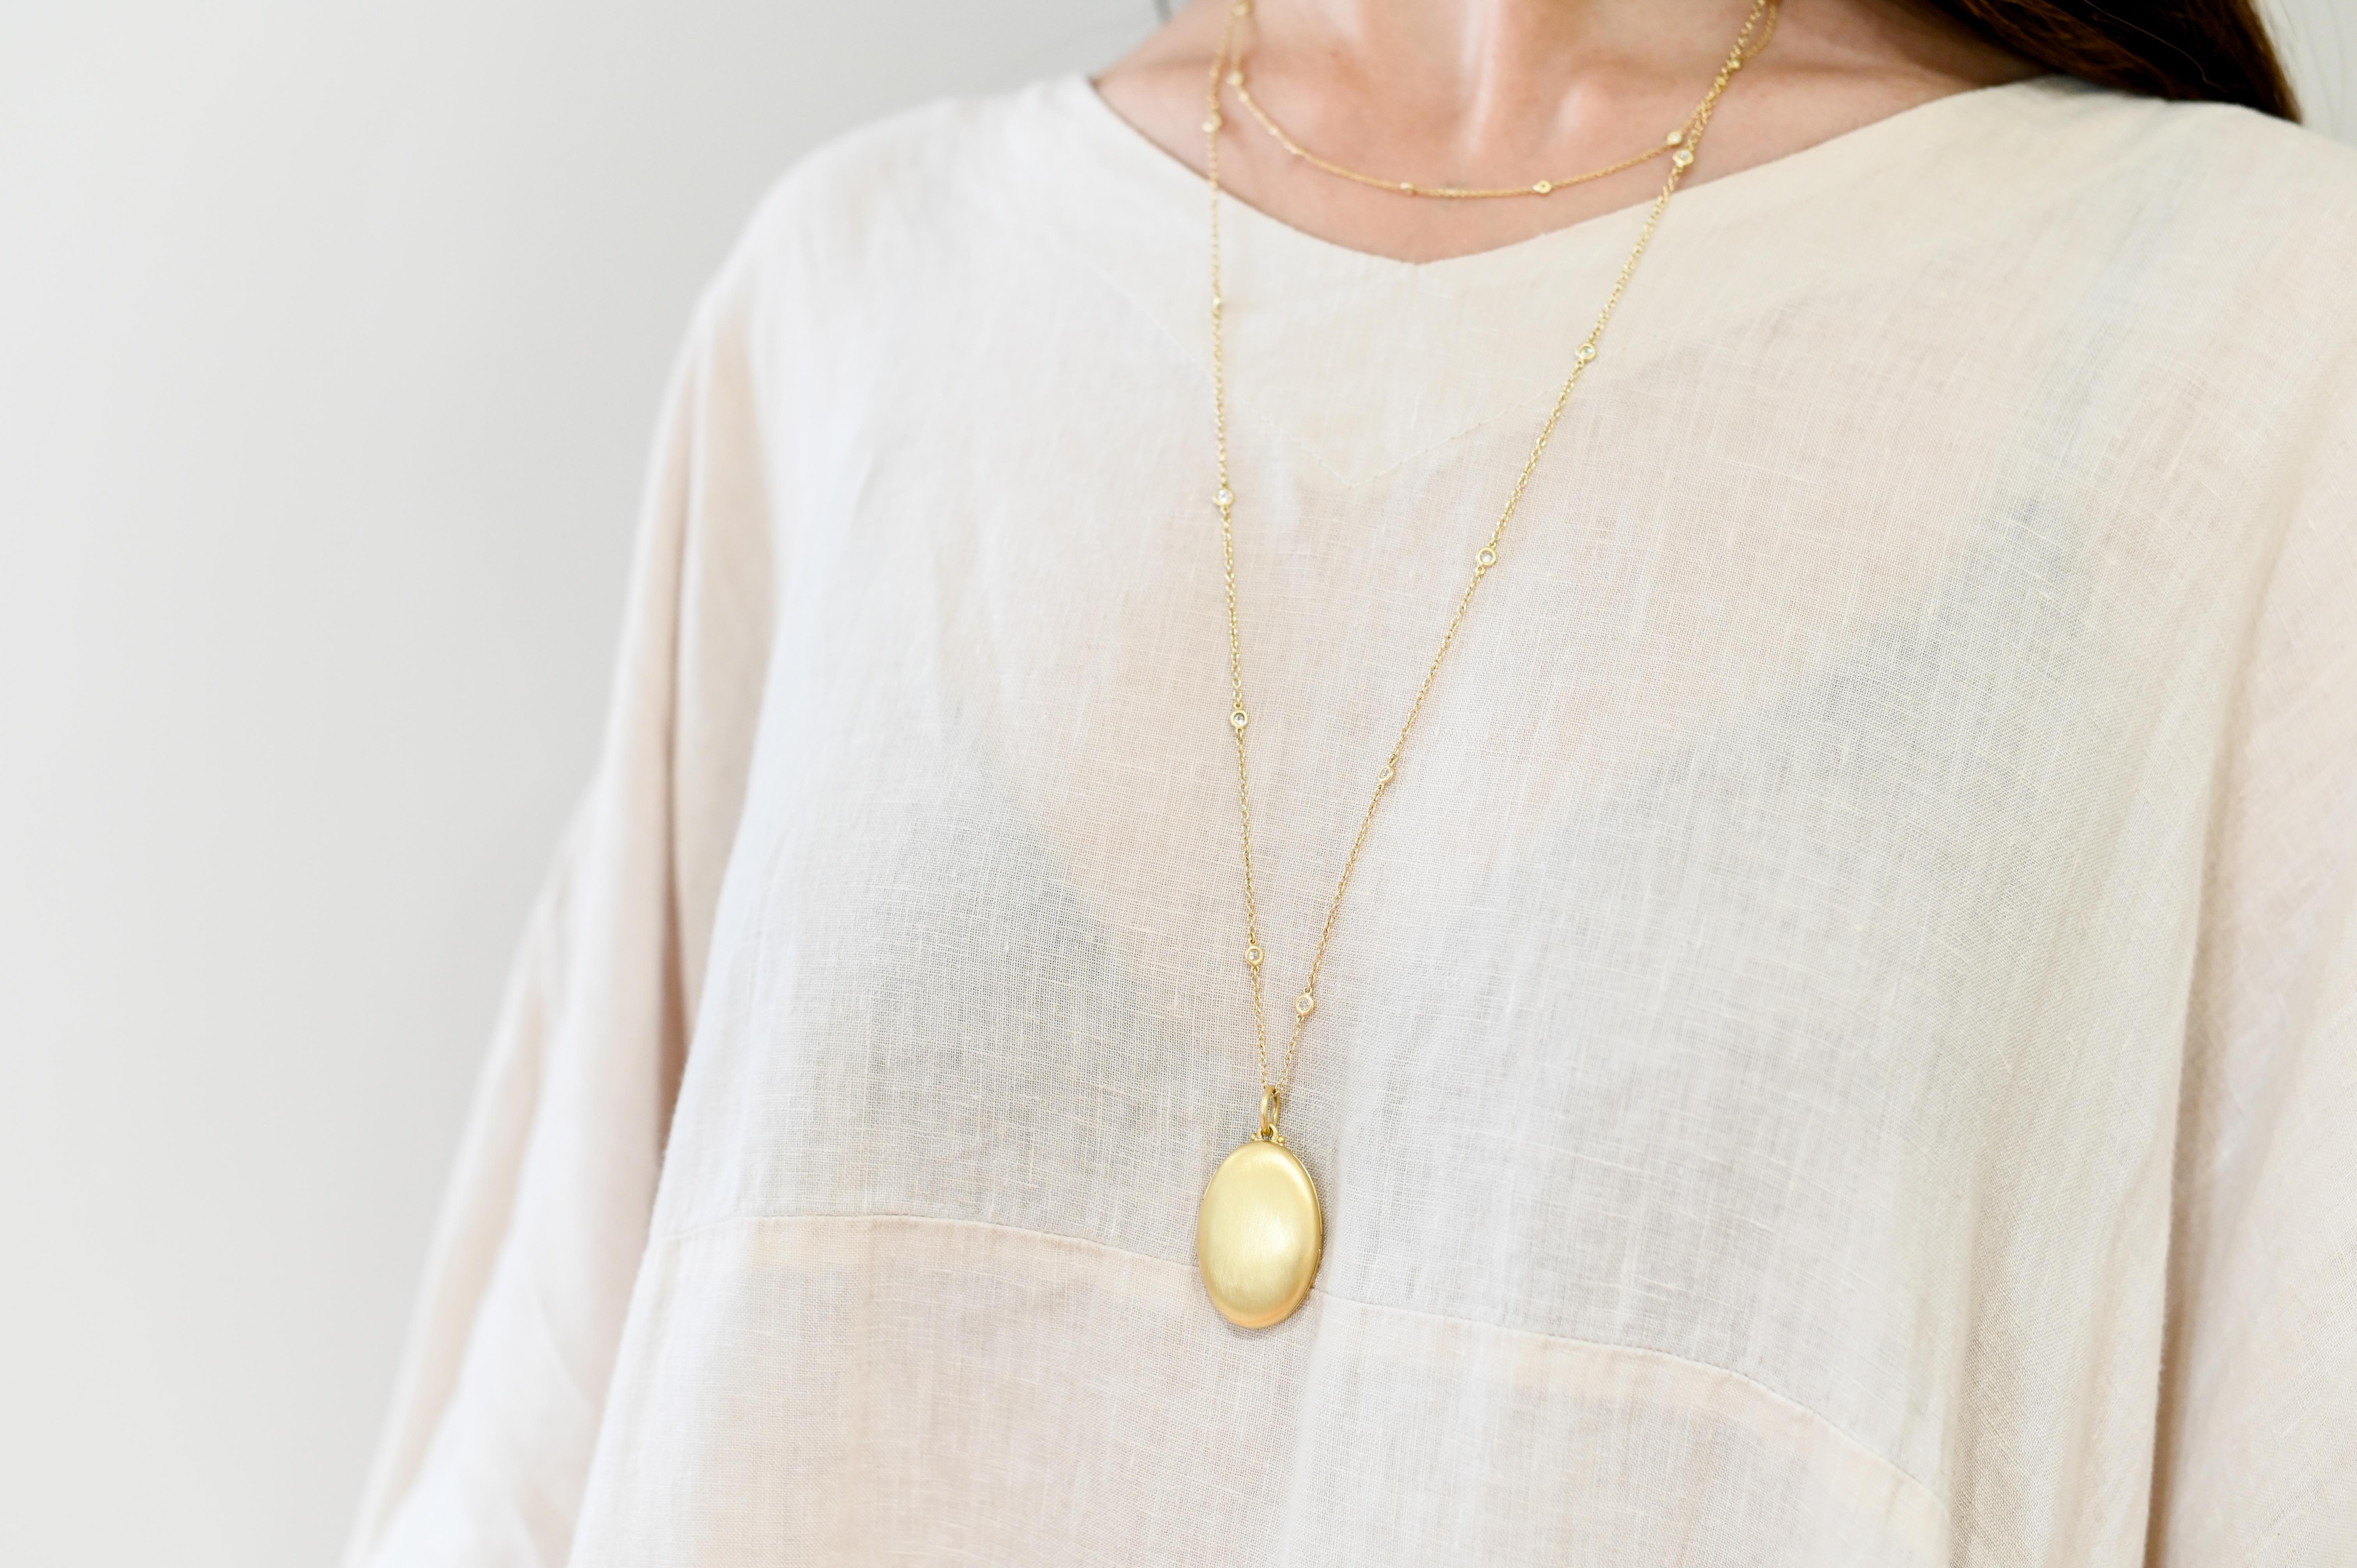 Faye Kim's 18 Karat Gold Large Oval Locket combines both substance and style. Finely handcrafted and matte-finished. Personalize it with an engraving or with gemstones.

Locket 1.5